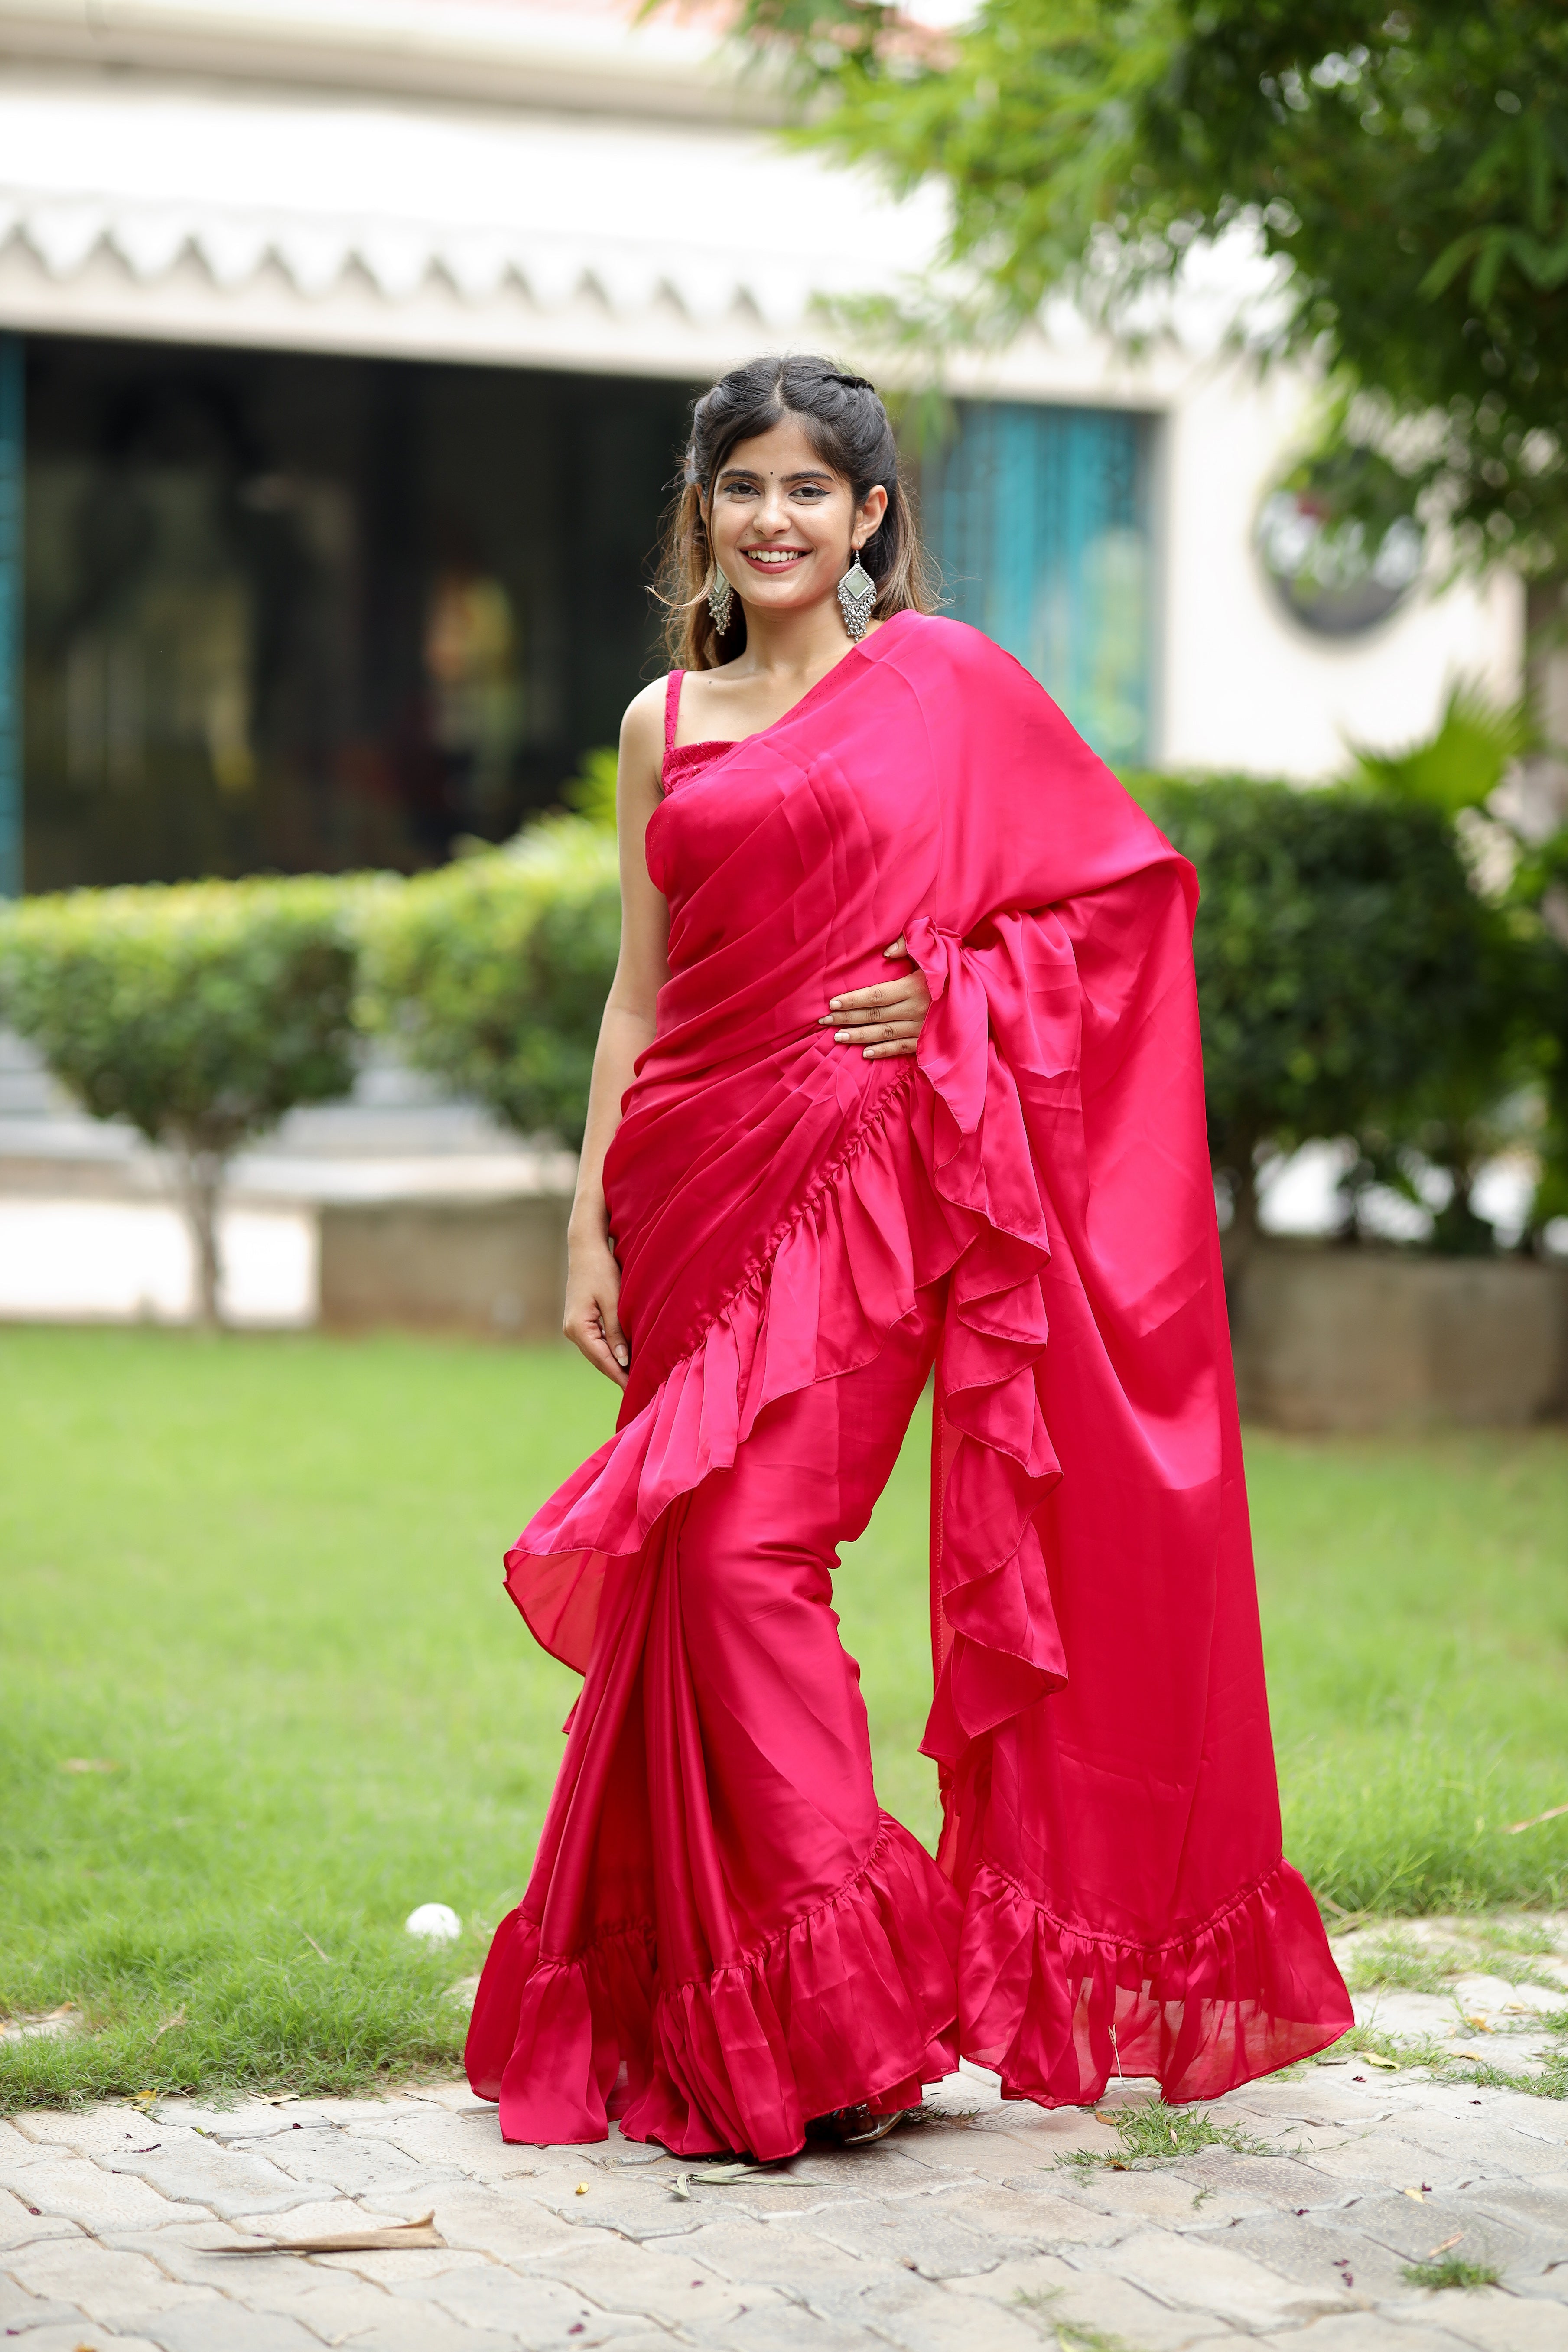 Buy Deep Pink Color Ruffle Saree Online on Fresh Look Fashion